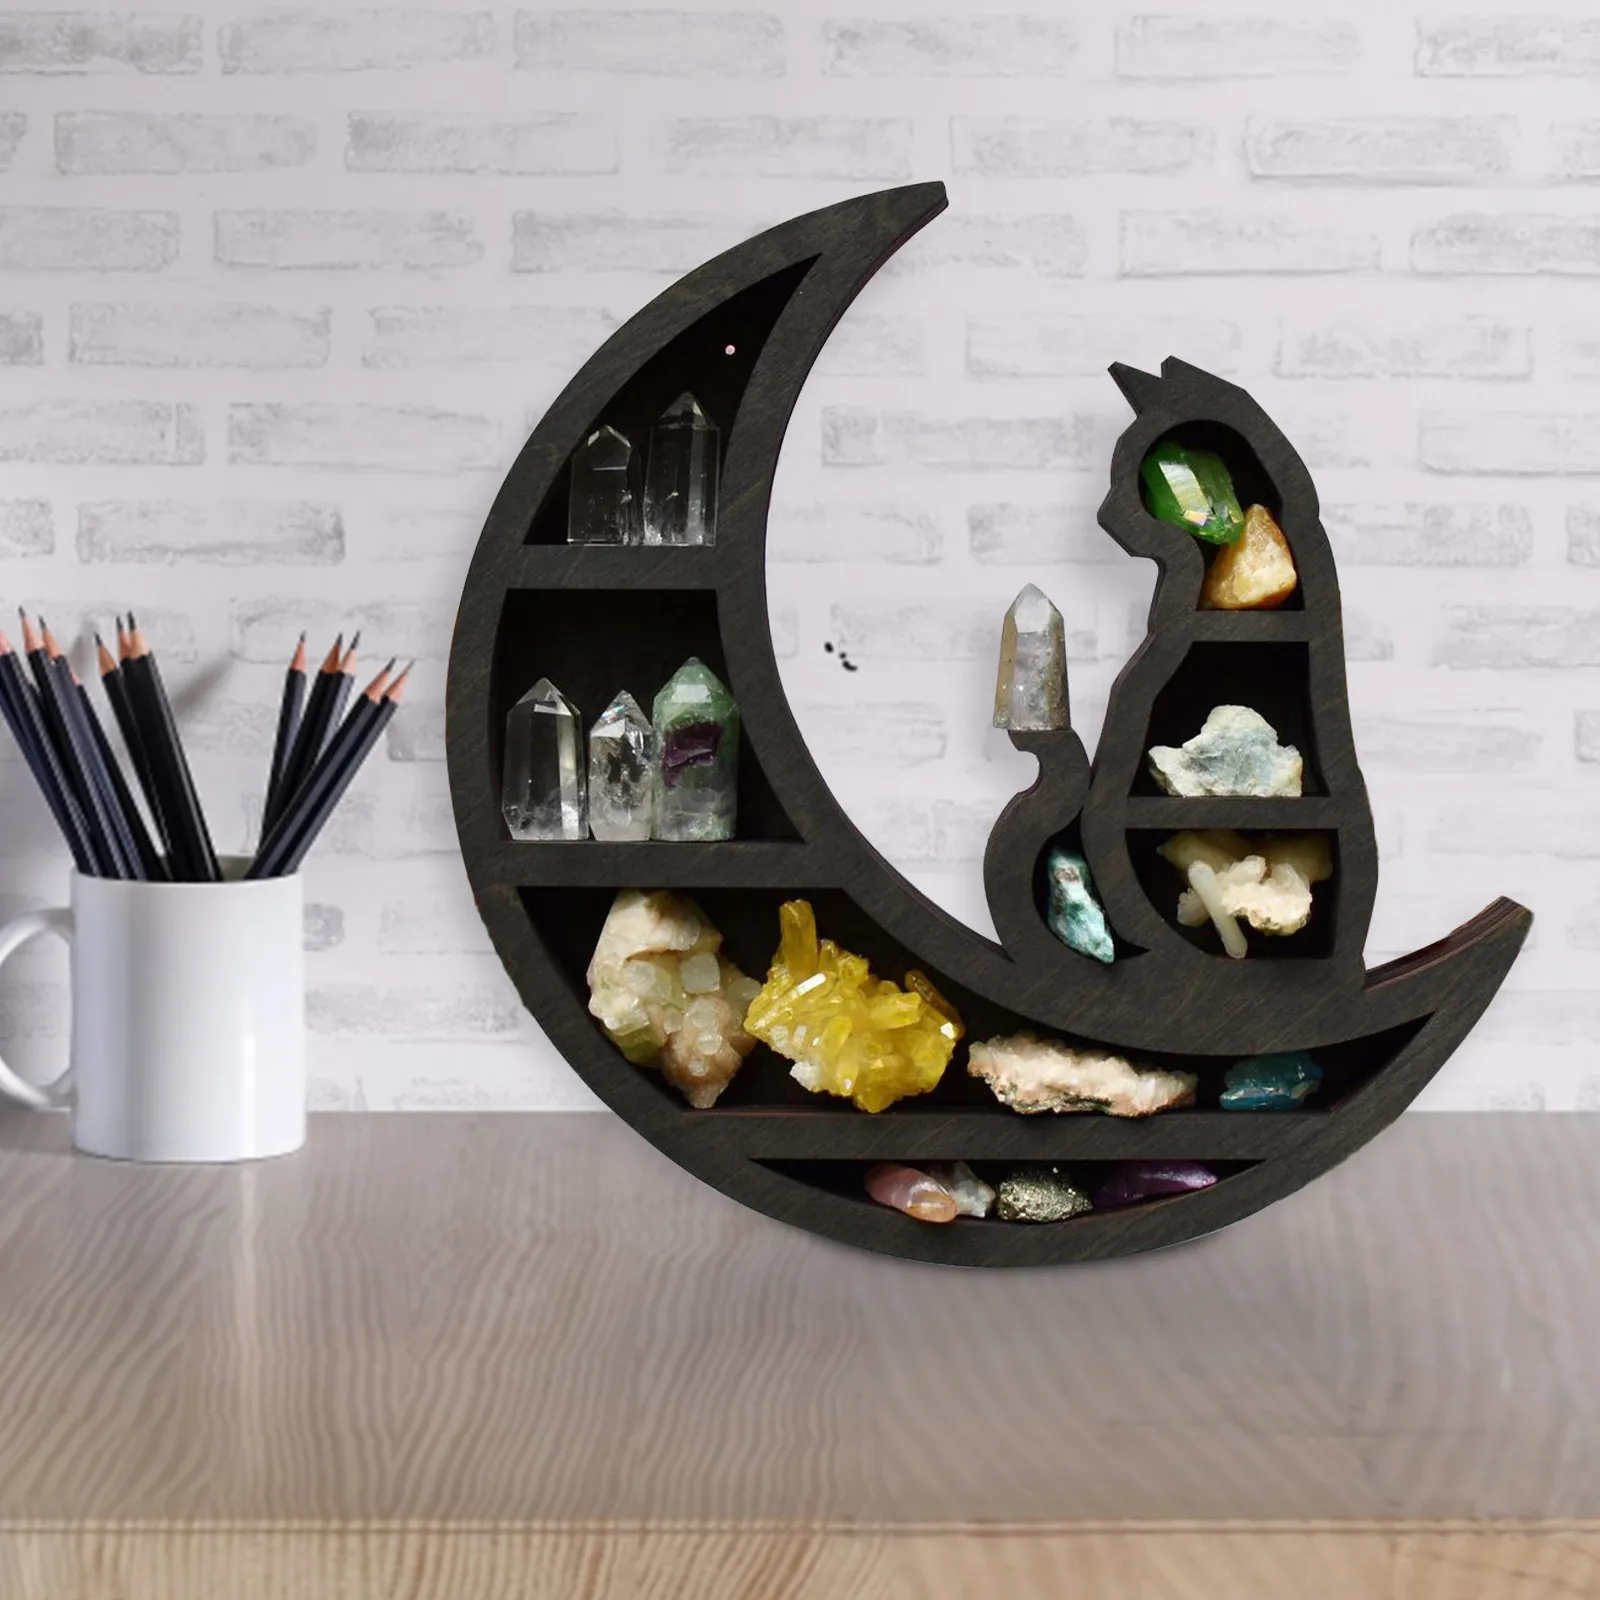 Cat and Moon Wooden Shelf for home decor5